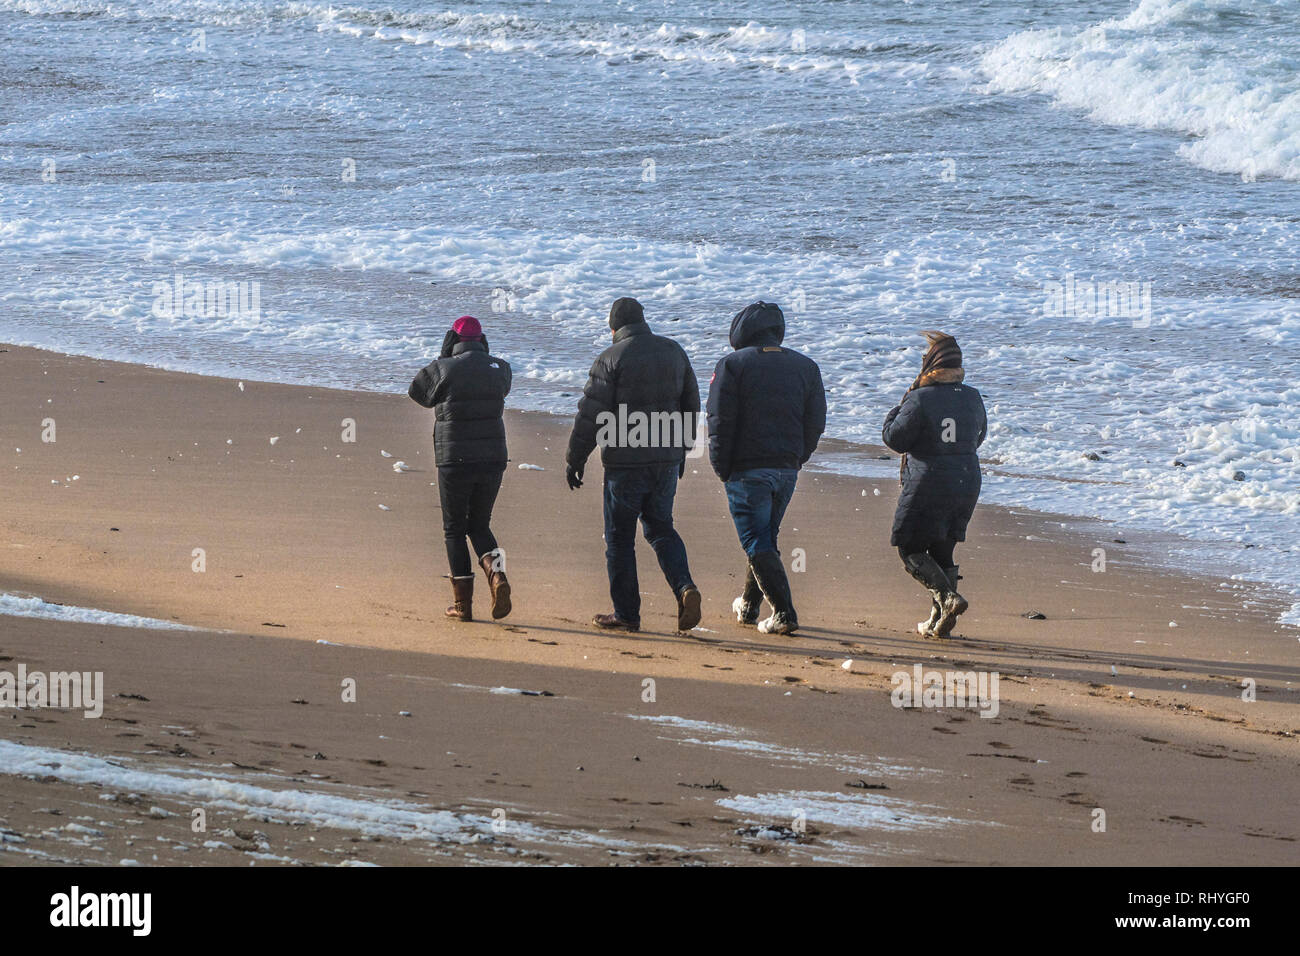 People wrapped up against the cold weather walking along Fistral Beach in windy weather conditions. Stock Photo